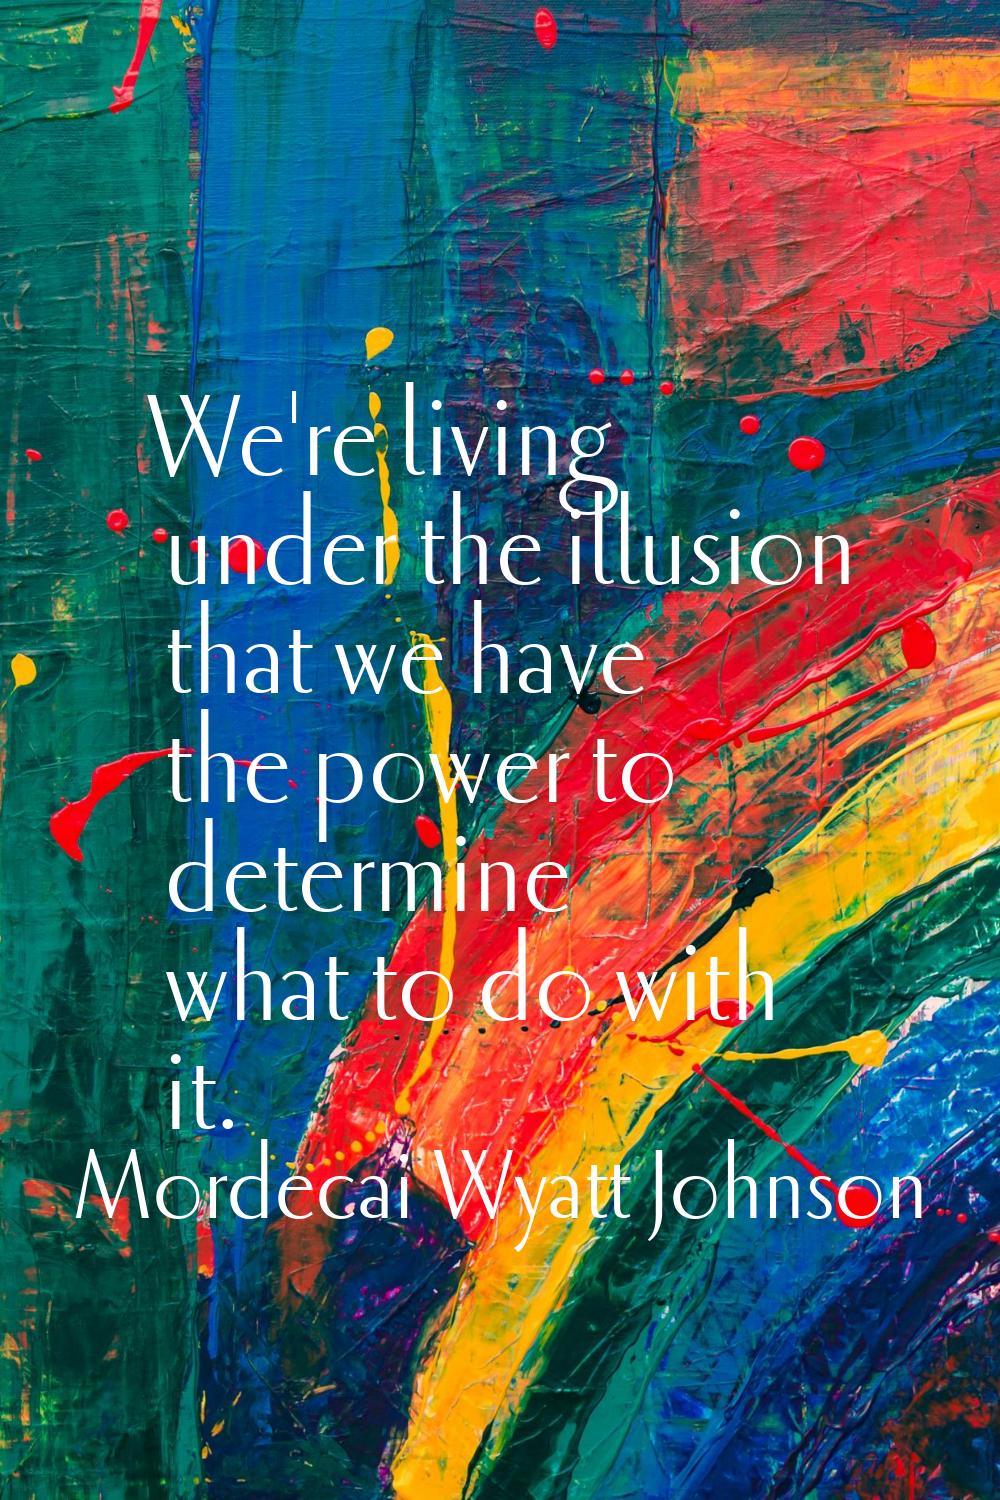 We're living under the illusion that we have the power to determine what to do with it.